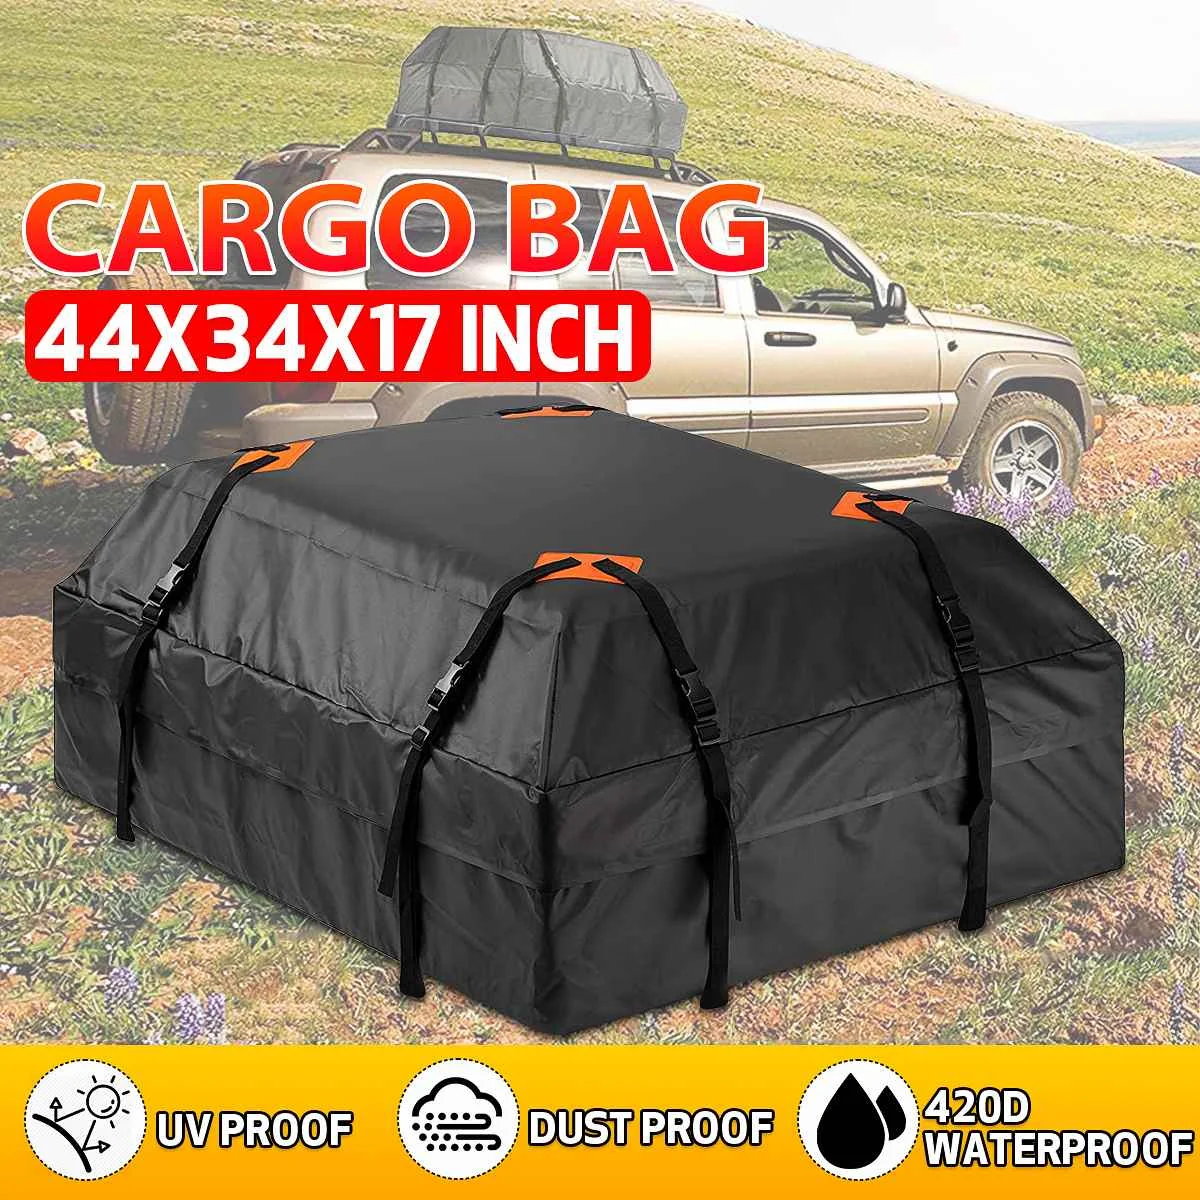 

120x90x44cm Large Waterproof Car Cargo Roof Bag Rooftop Luggage Carrier Black Storage Cube Bag Travel SUV Van For Universal Cars